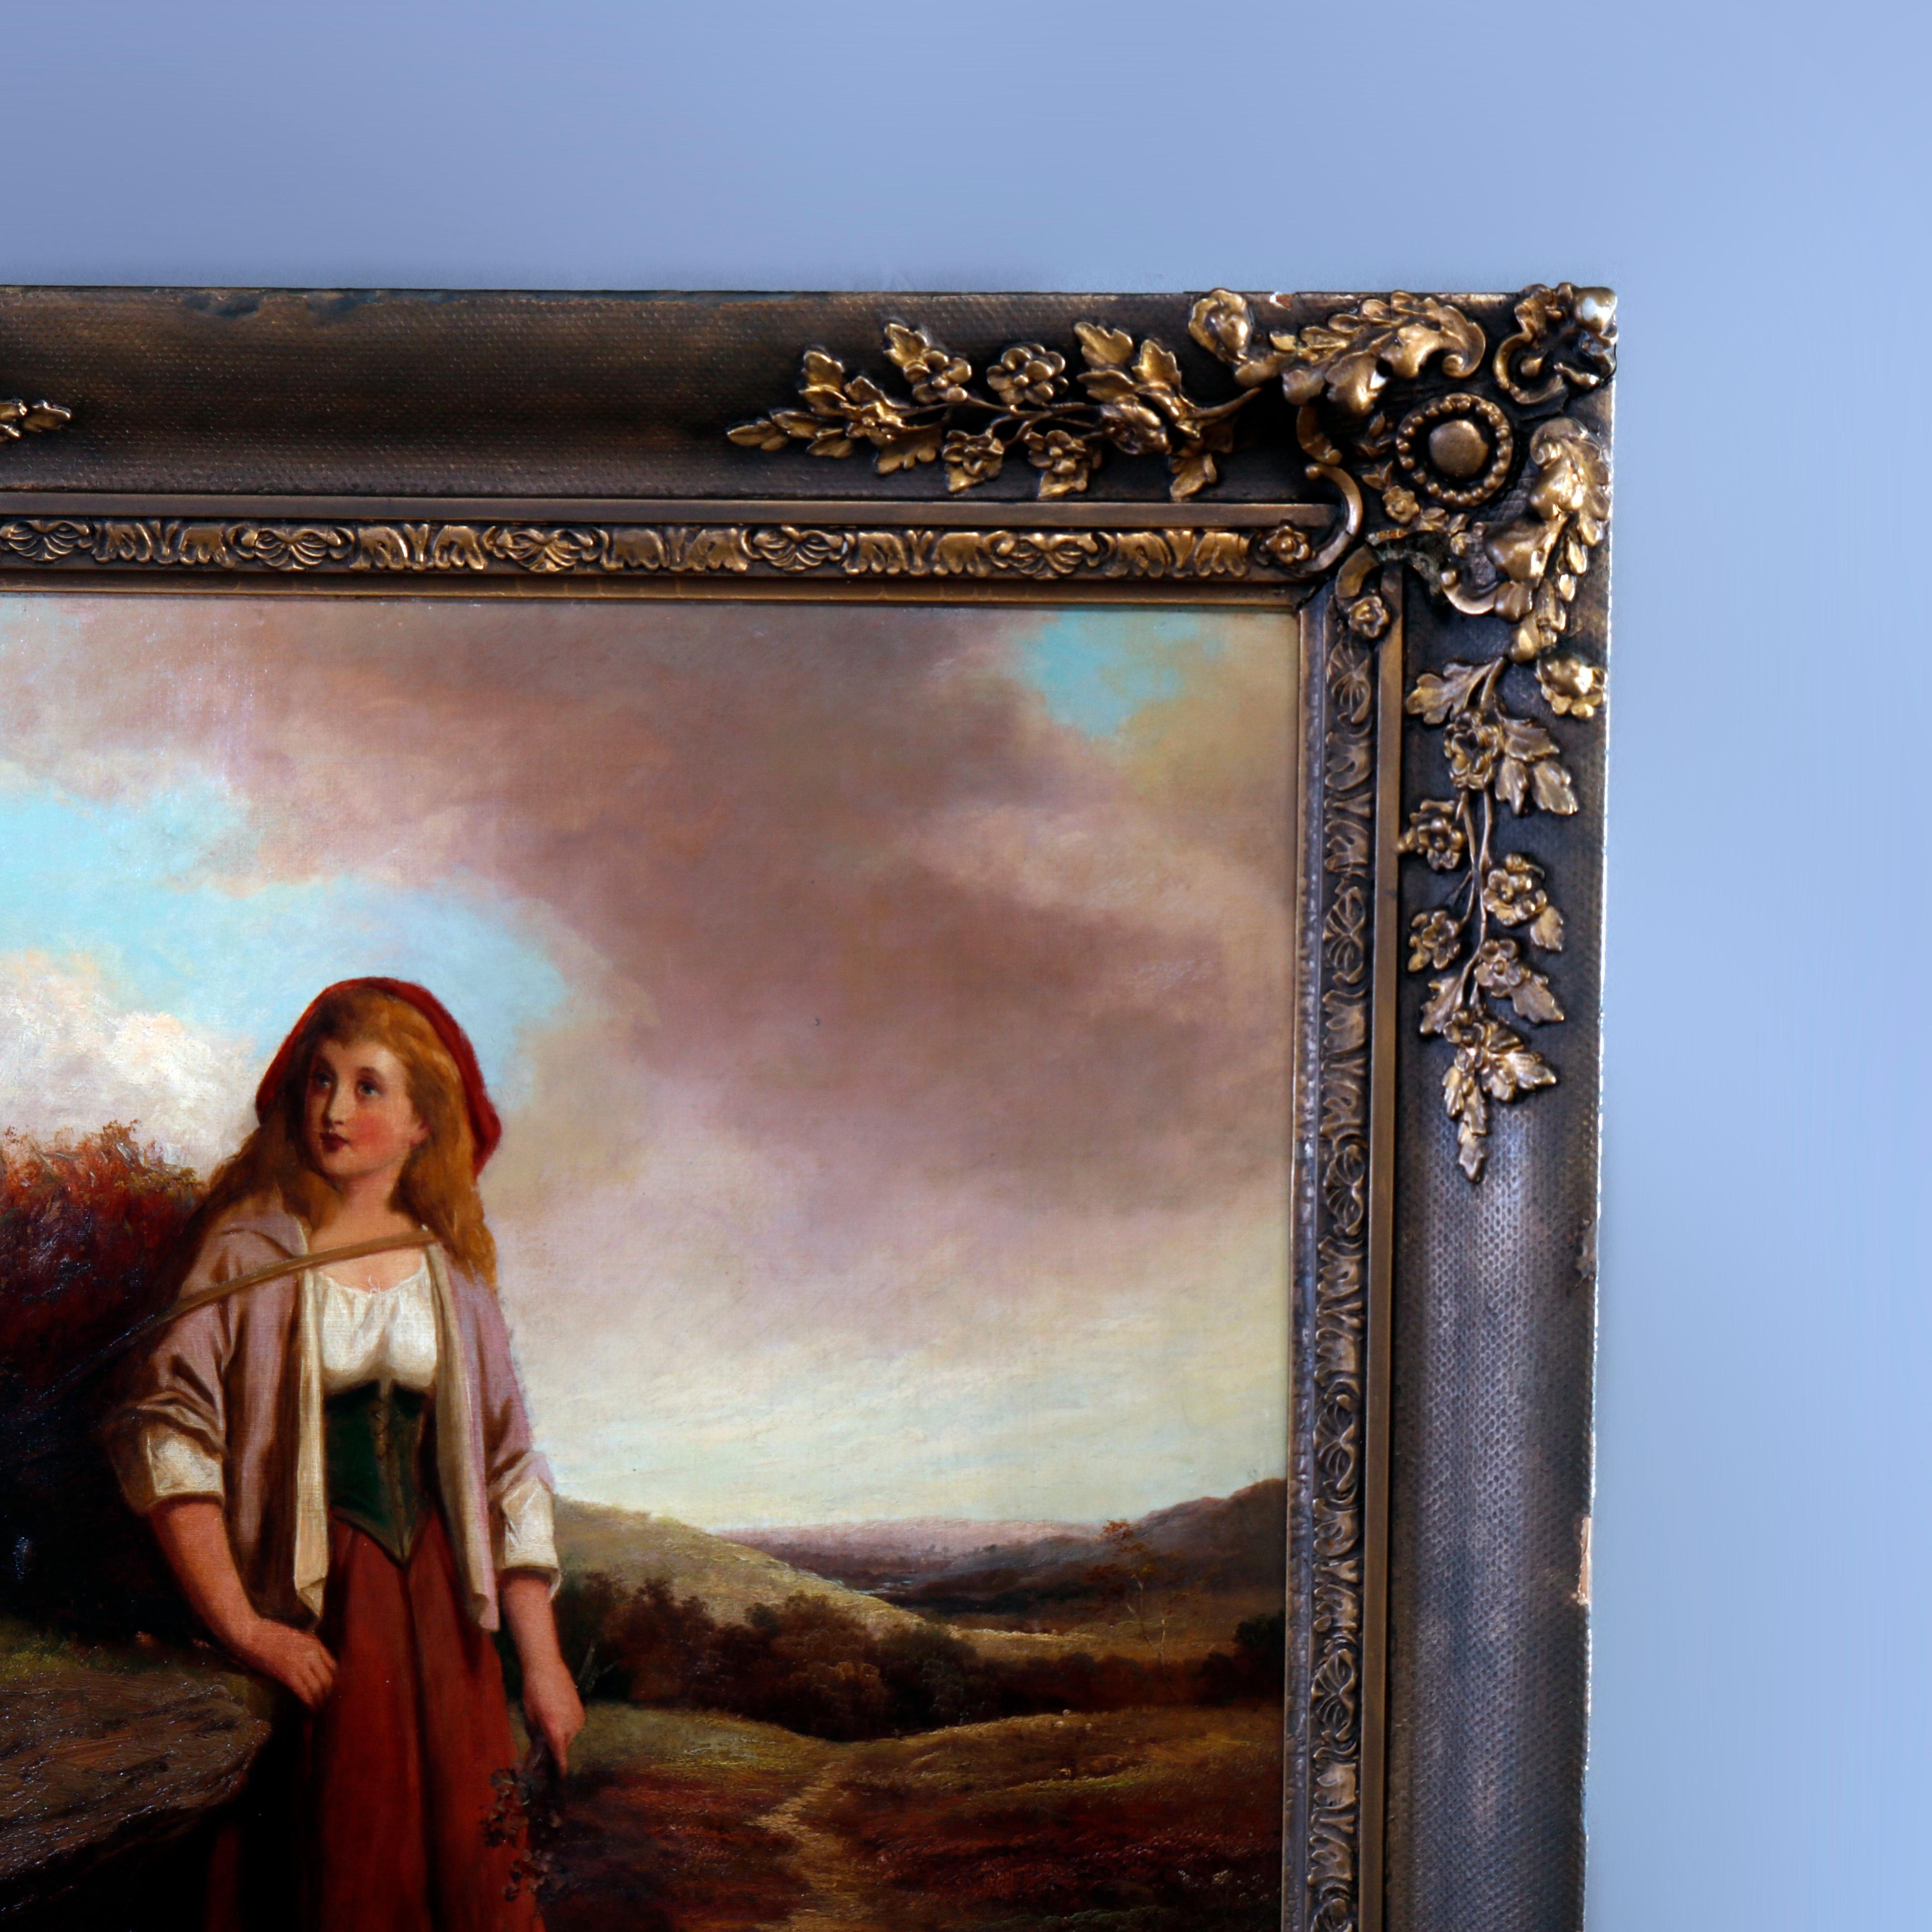 19th Century Antique English Portrait Painting of Young Maiden in Field, Giltwood Frame c1870